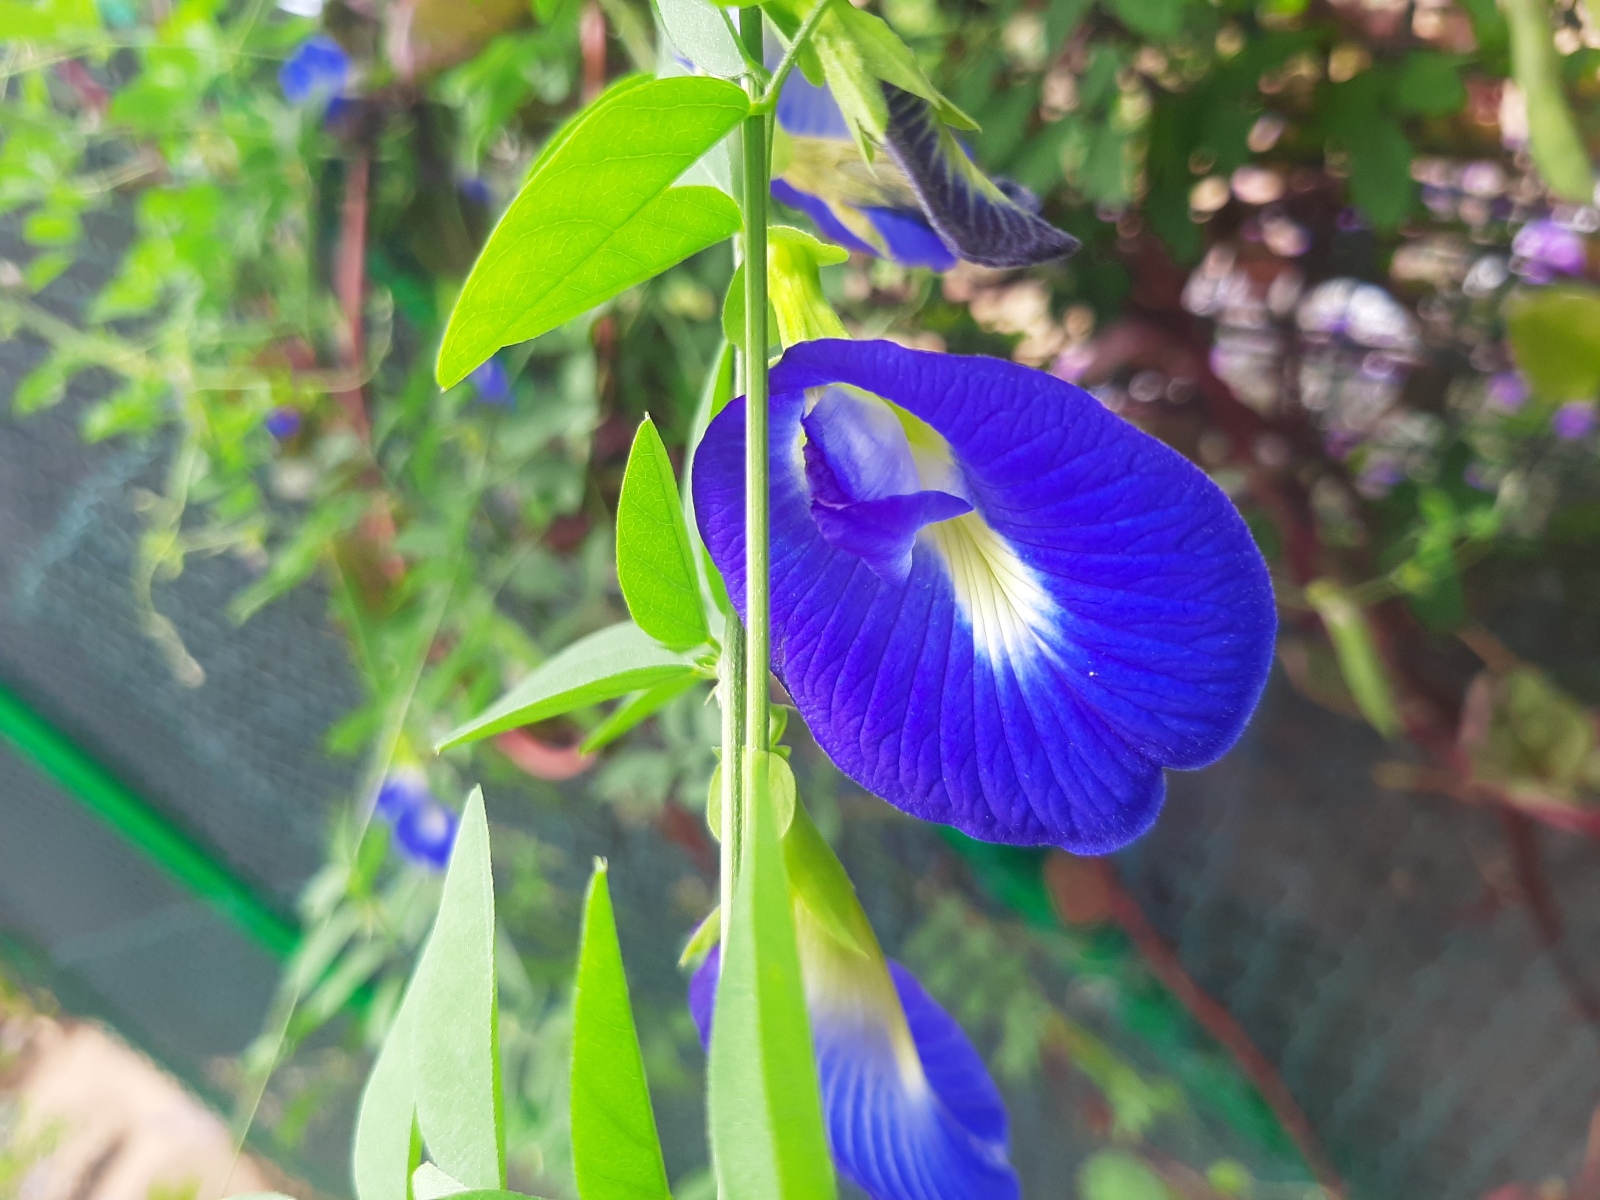 Nutritional Benefits of Eating Butterfly Pea Flowers